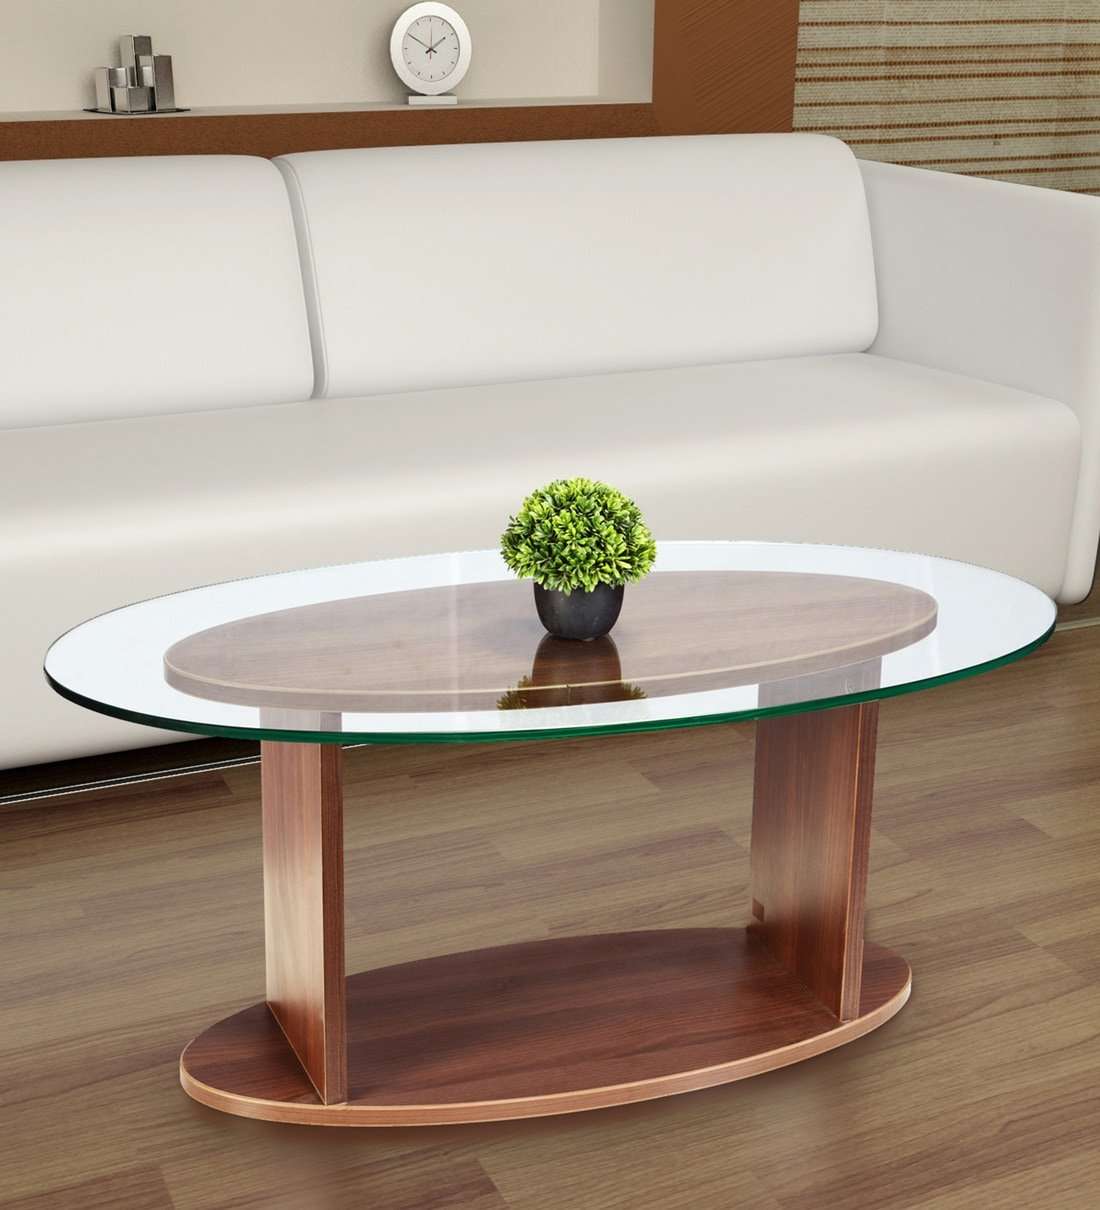 Buy Oval Shaped Glass Top Coffee Table in Walnut Finish by ...